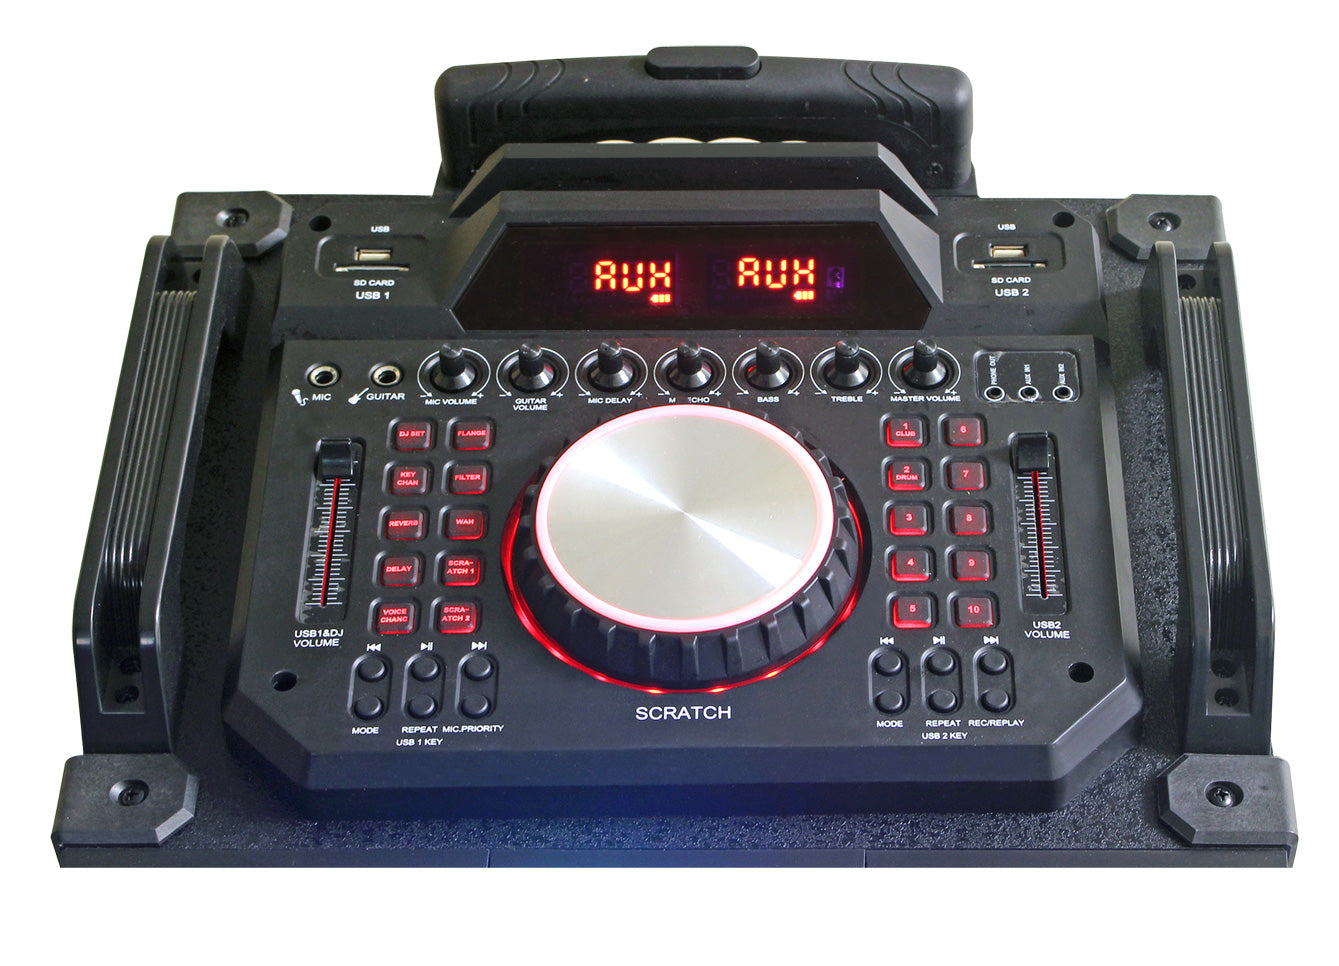 Fully Amplified Portable 7000 watts Double 12” Speaker WITH DJ MIXER